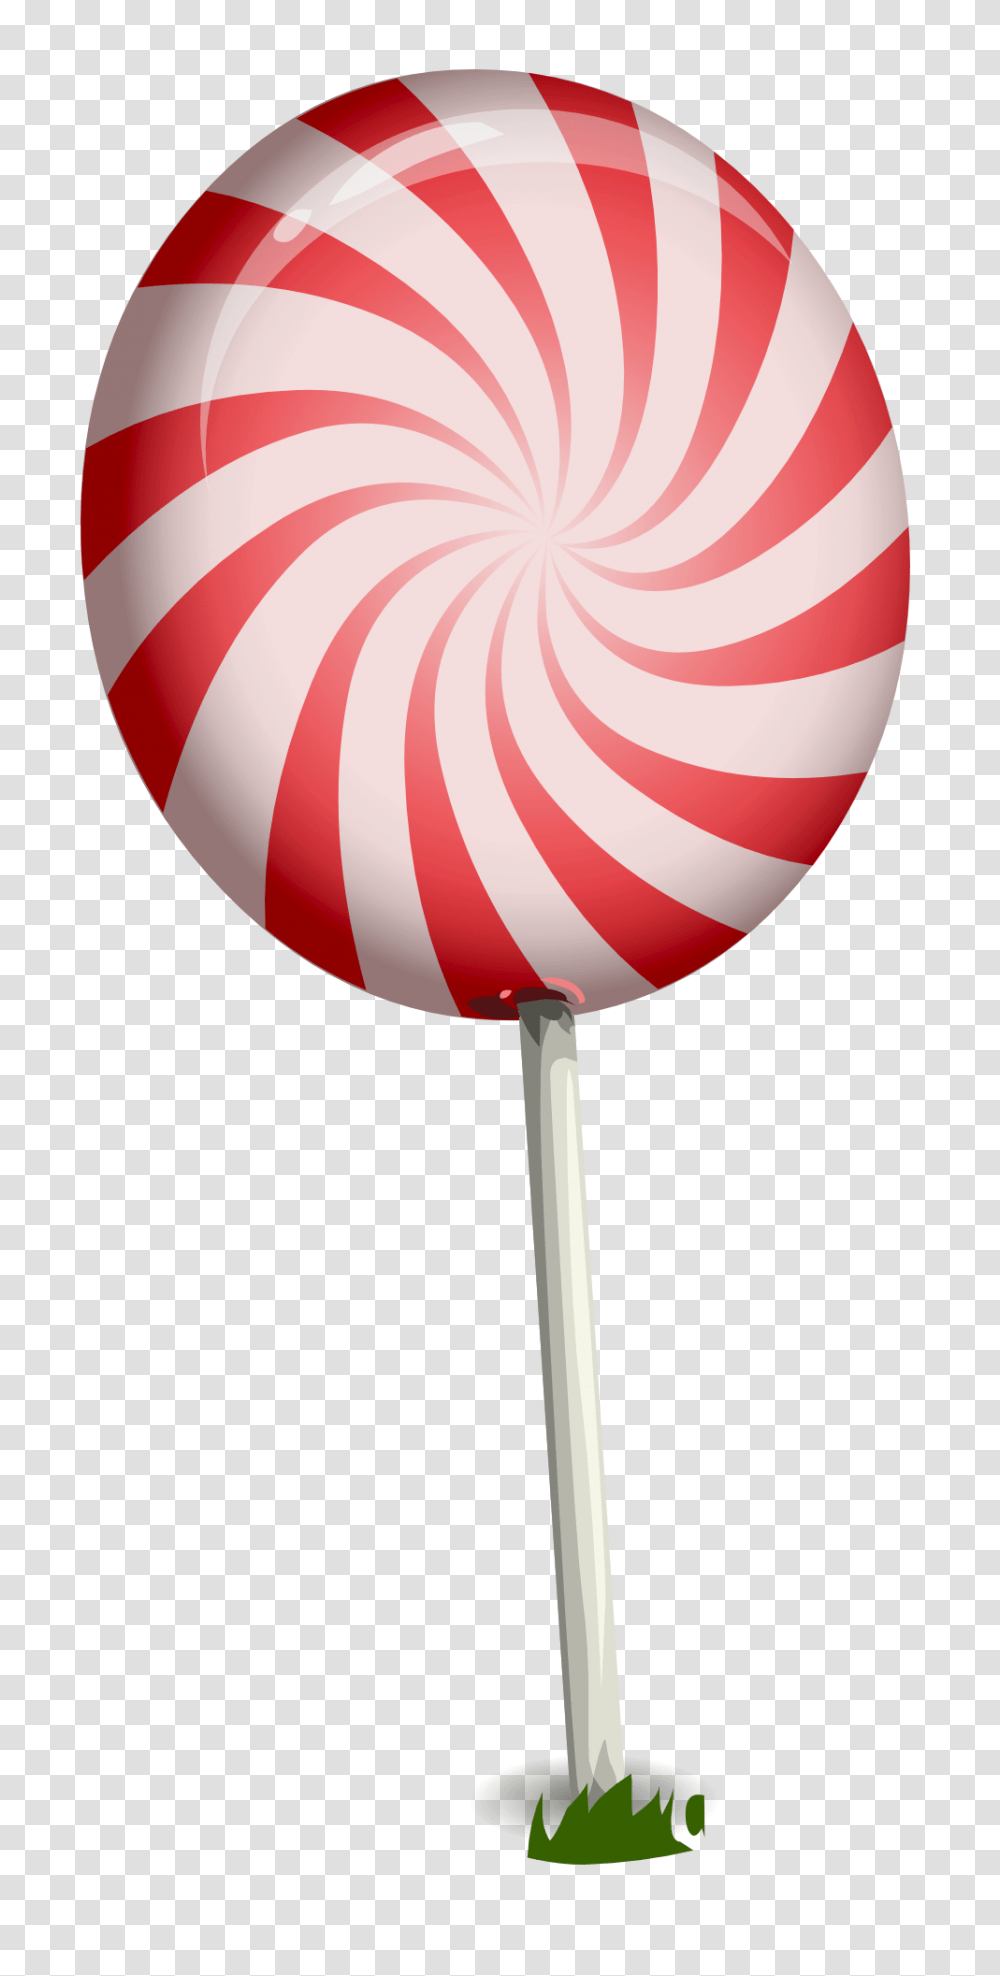 Download Candy Images Candy, Lollipop, Food, Lamp, Balloon Transparent Png